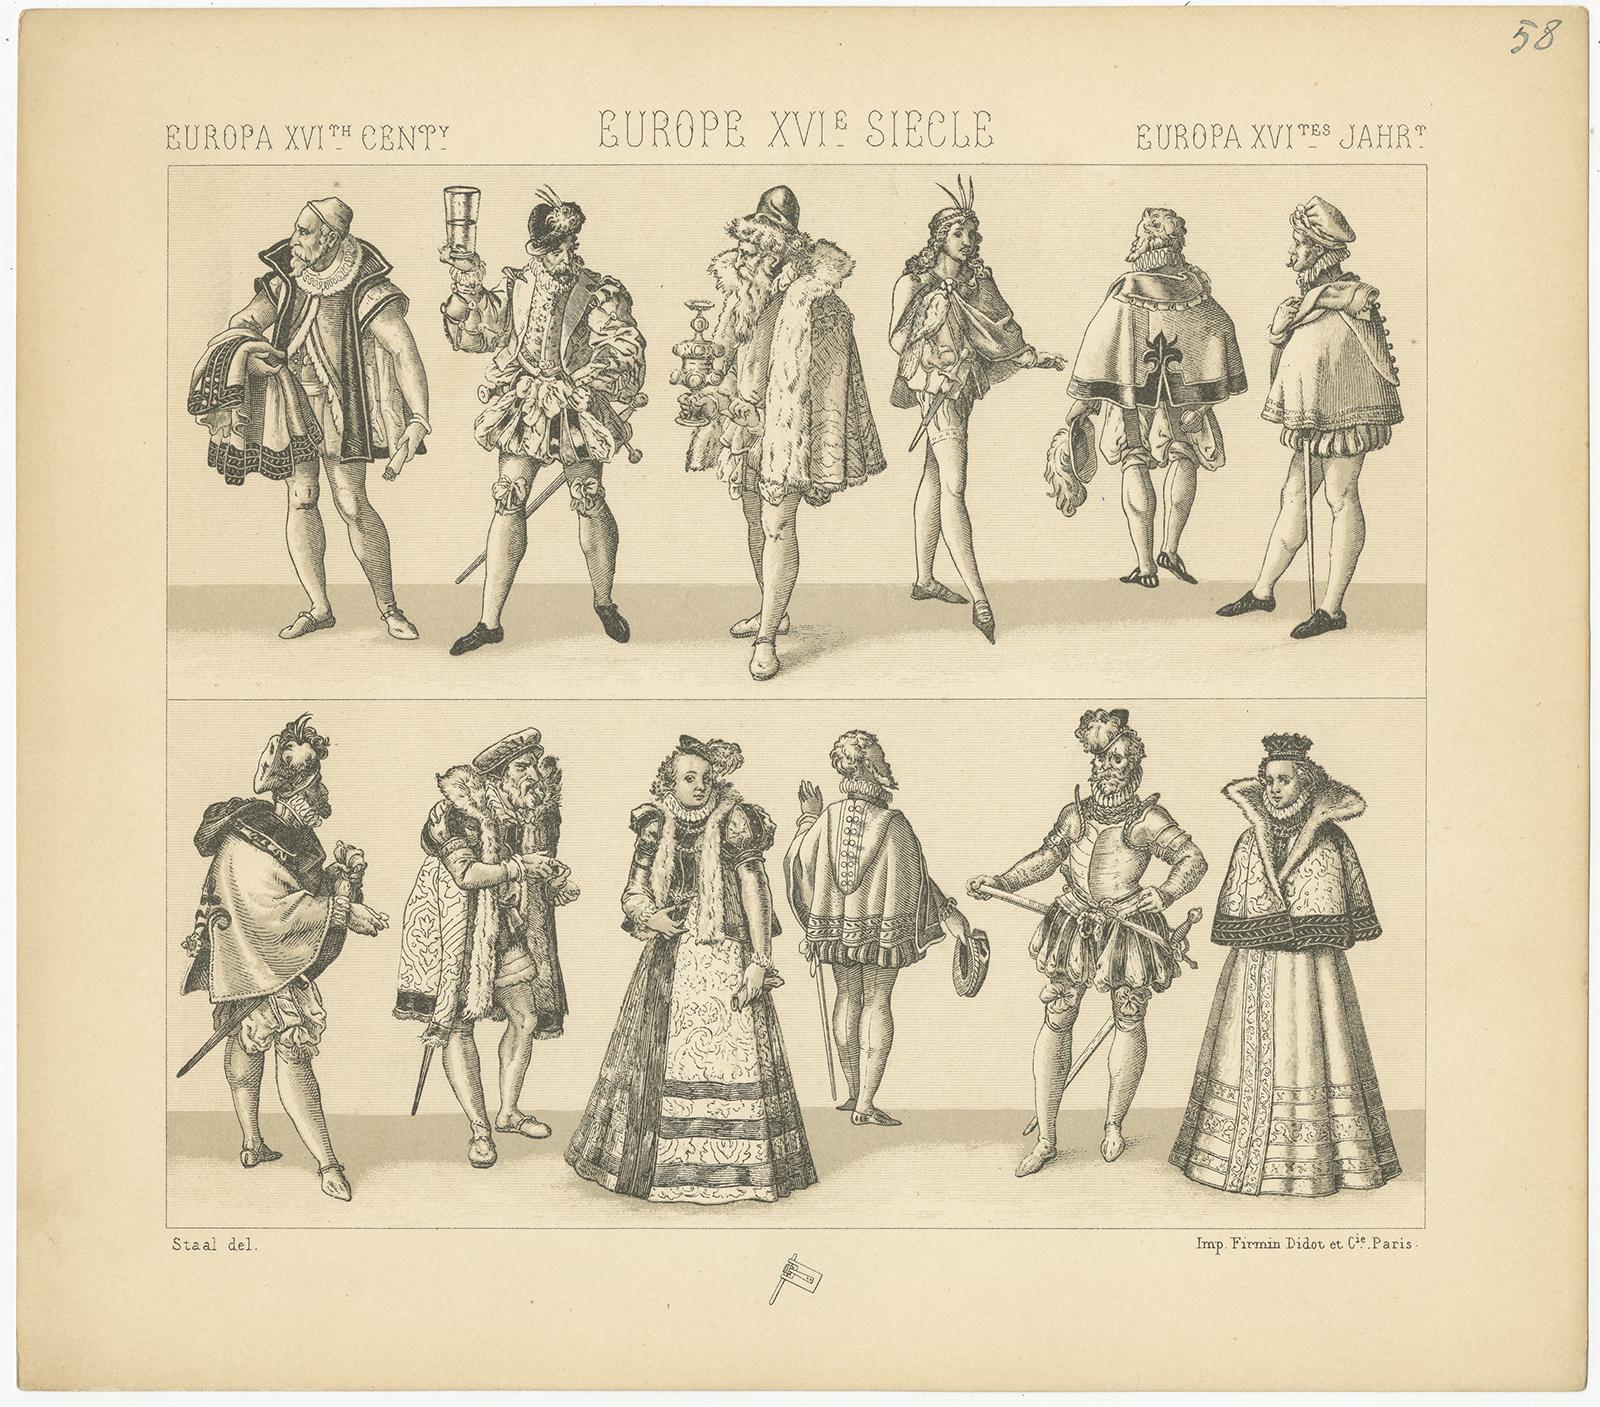 Antique print titled 'Europa XVIth Cent - Europe XVIe, Siecle - Europa XVItes Jahr'. Chromolithograph of European 16th century costumes. This print originates from 'Le Costume Historique' by M.A. Racinet. Published circa 1880.